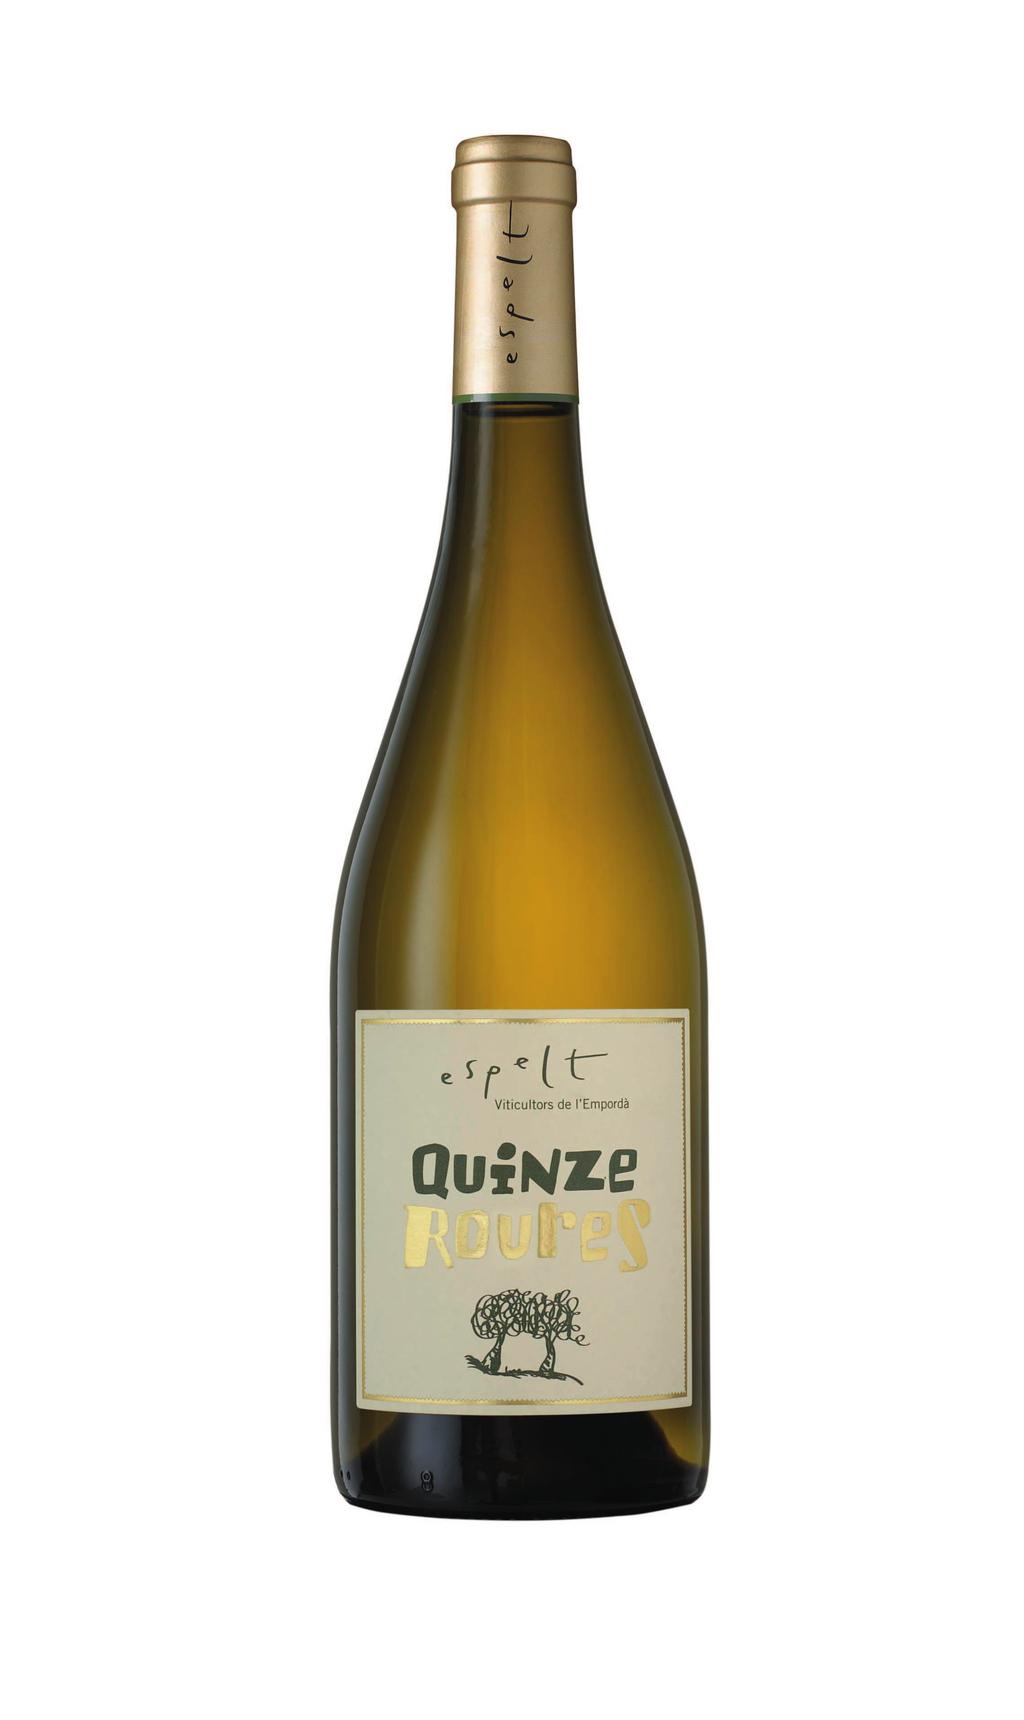 quinze roures Reviews: International Wine Challenge (IWC): Commended (May, 2015) Decanter World Wine Awards: Silver Medal (2013) Tim Atkin: 91 points (September, 2013) Guia Peñin : 90 points La Guia